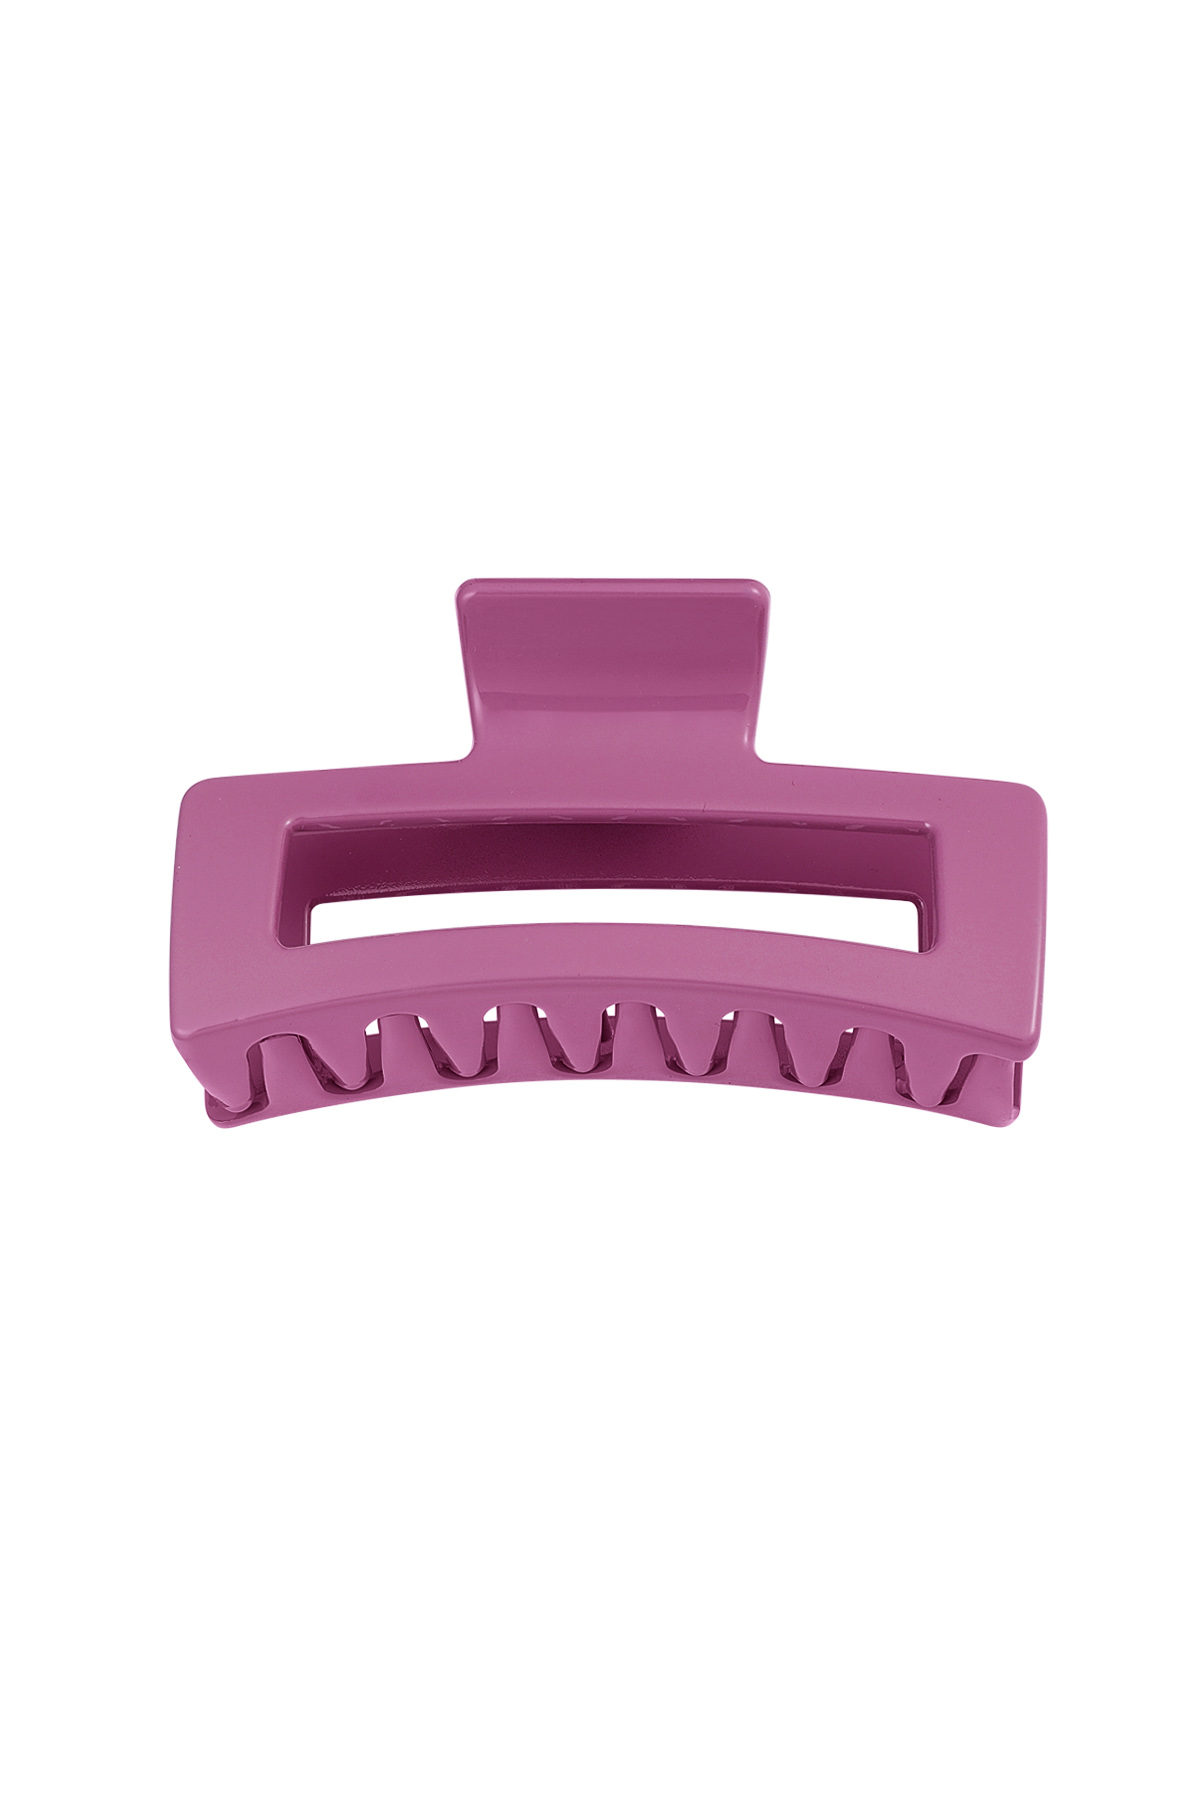 Hair clip rectangle - pink h5 